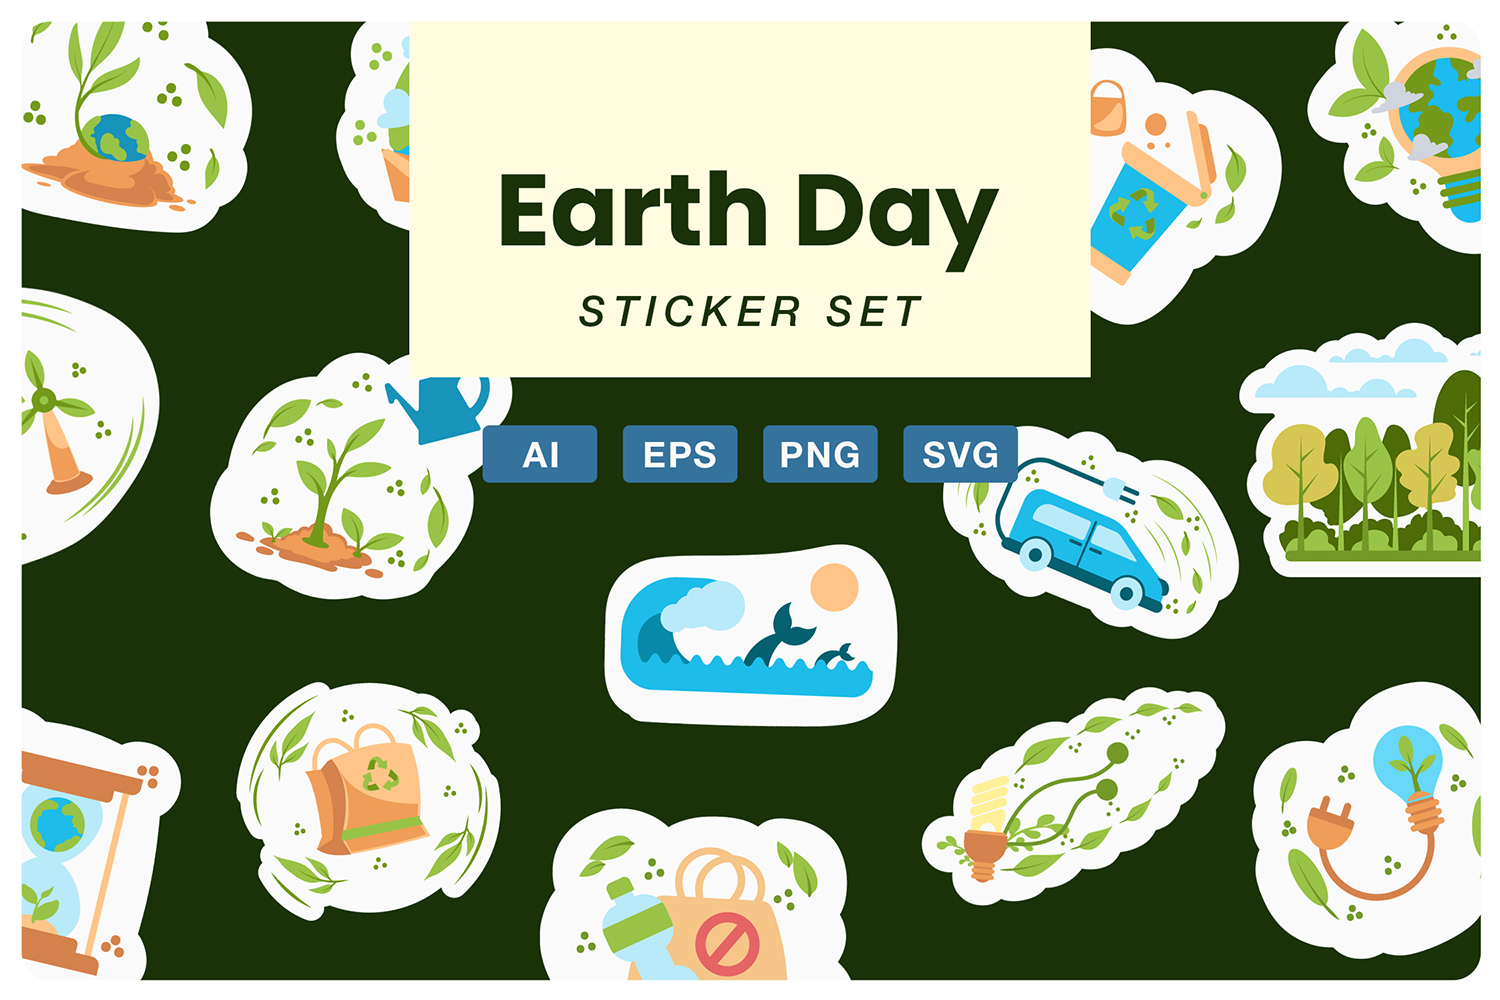 Save Our Earth Sticker Set